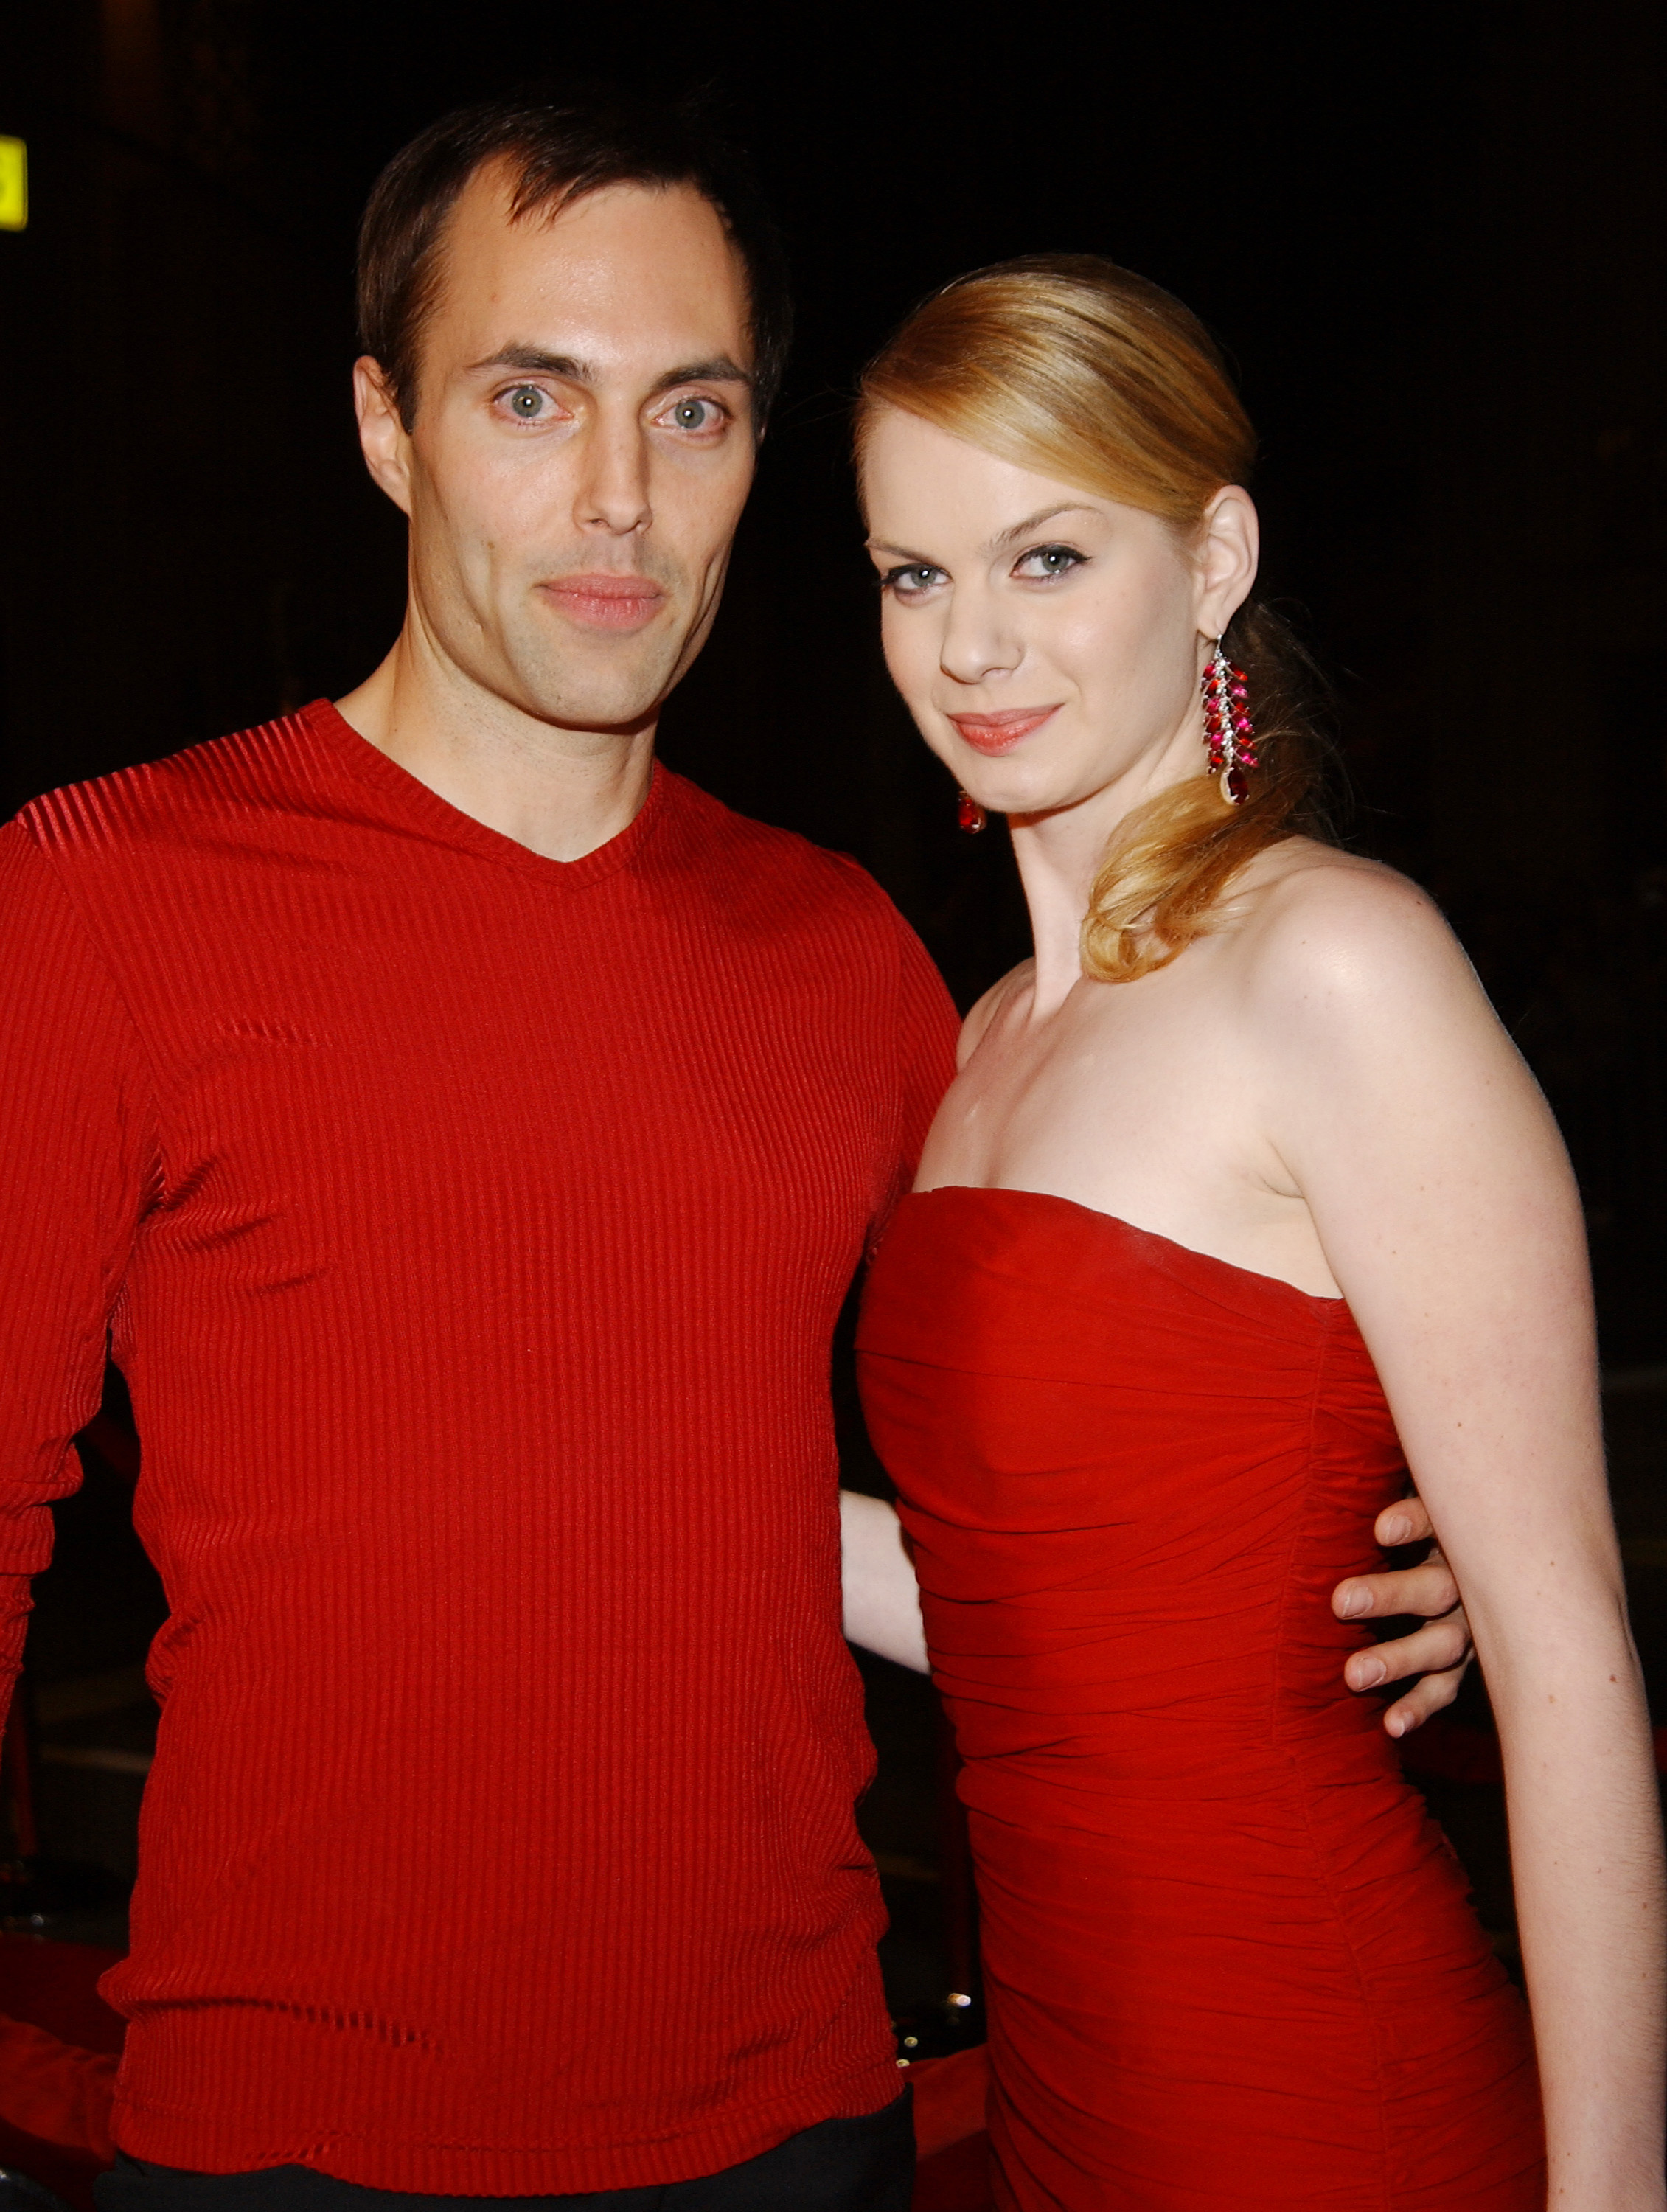 James Haven and girlfriend Rachel Anderson at the "Alexander" world premiere - arrivals on November 16, 2004 | Source: Getty Images